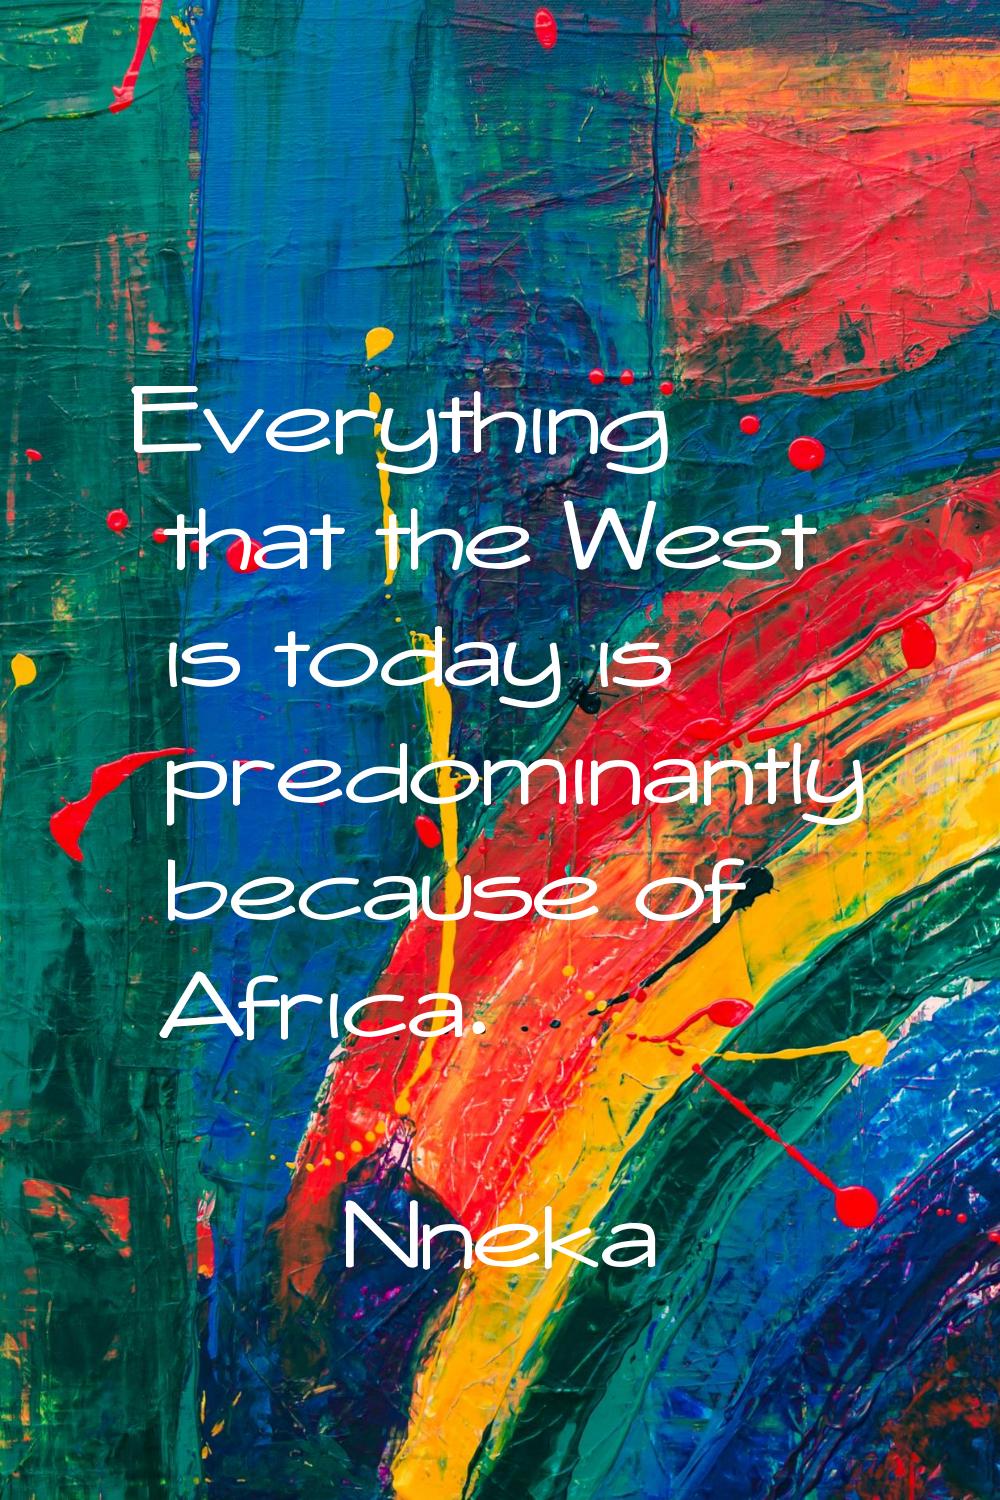 Everything that the West is today is predominantly because of Africa.